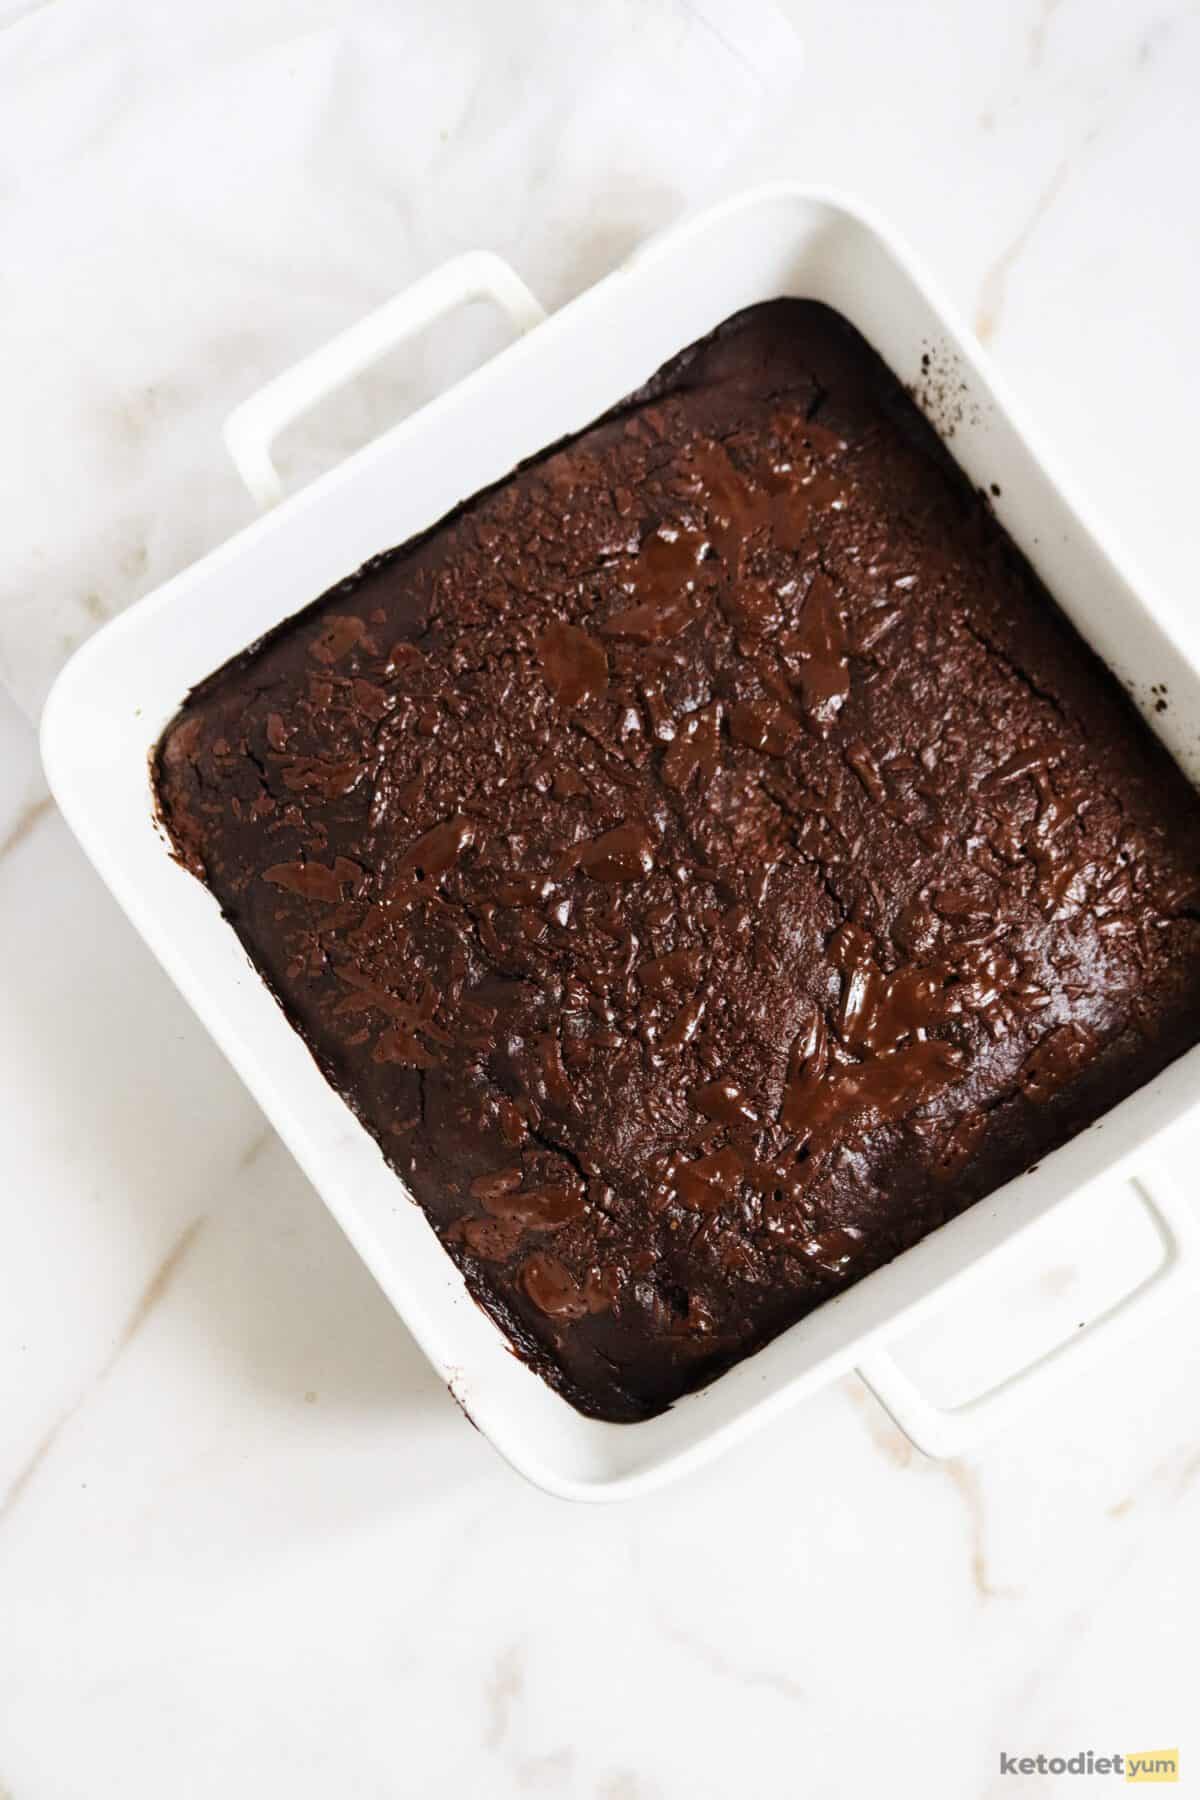 Baking pan with baked avocado brownie resting on a table